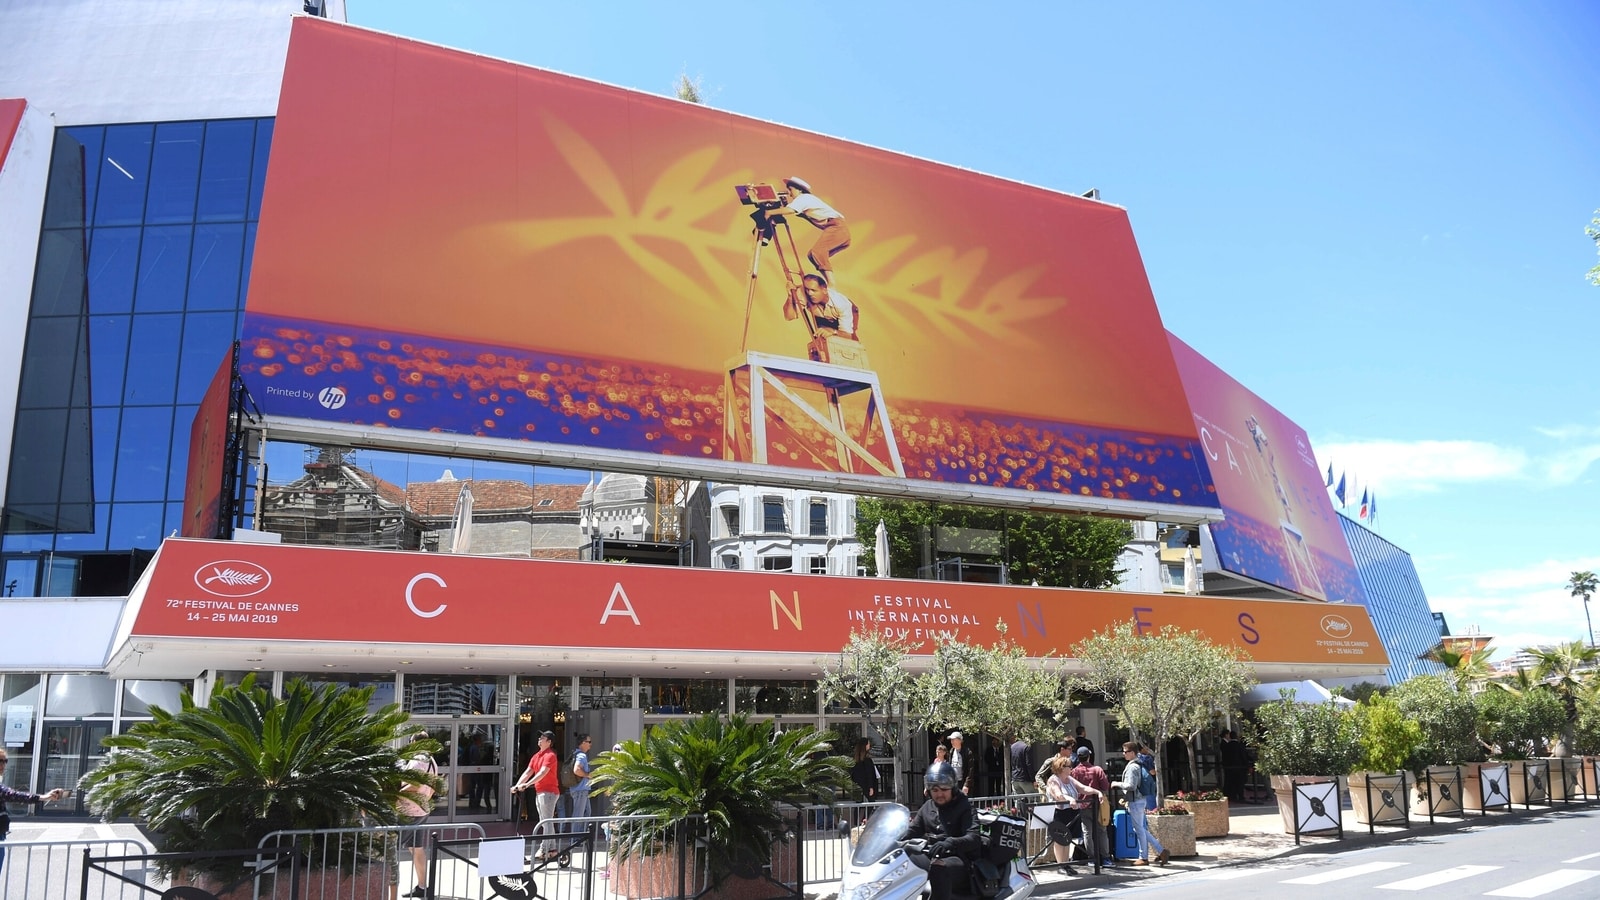 Two years on, Cannes film festival prepares for ‘normal’ party | World News